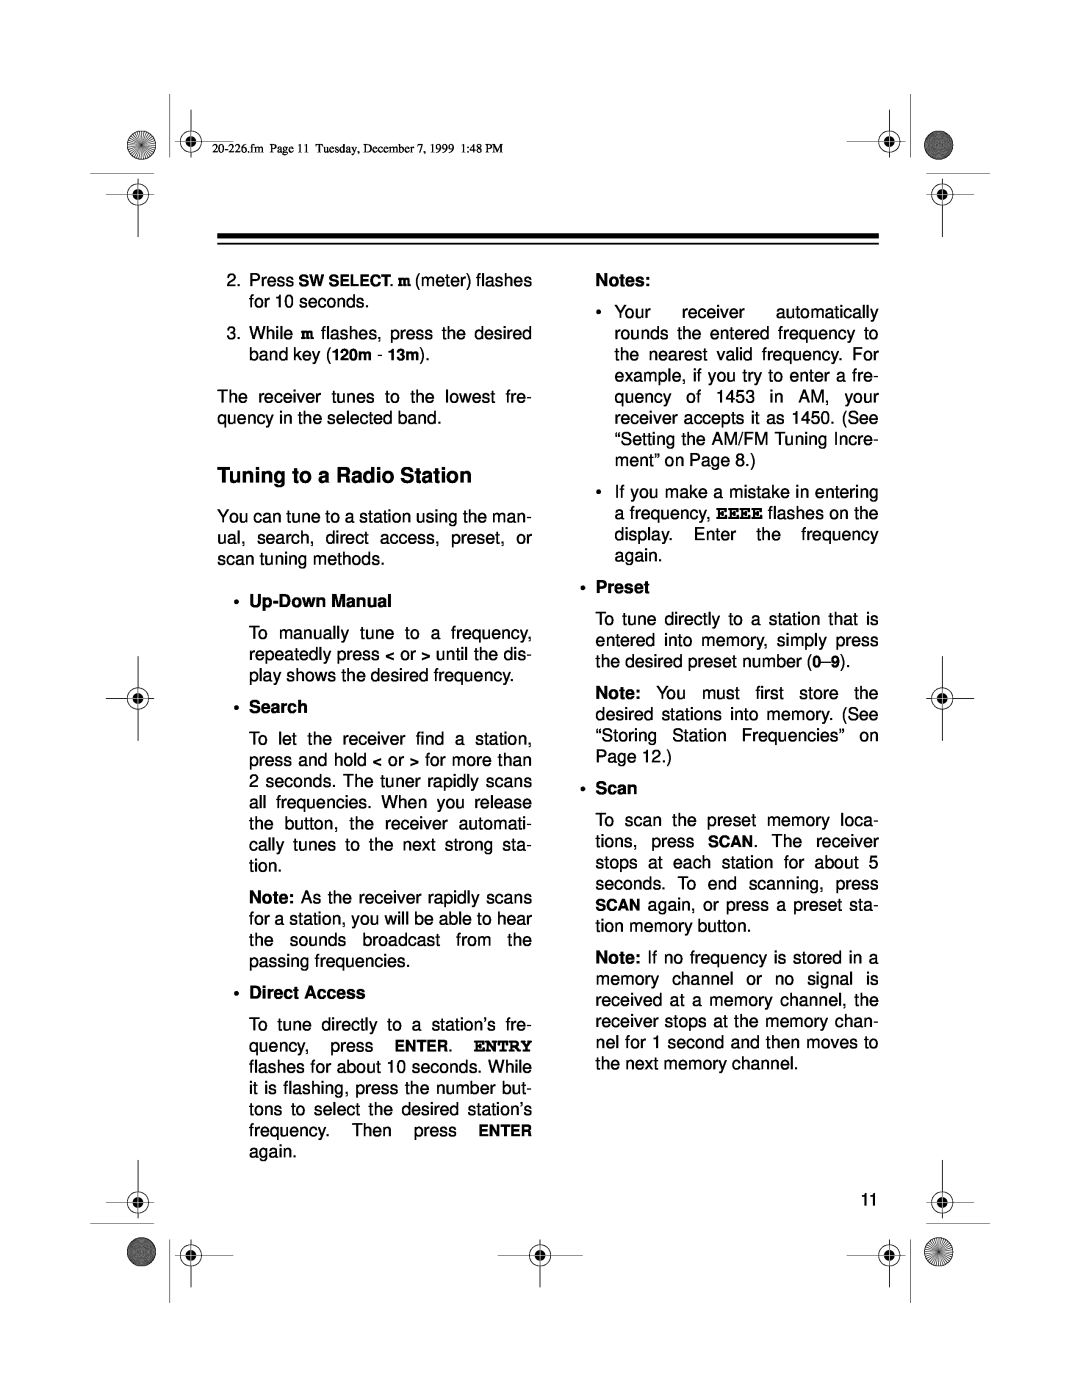 Radio Shack DX-396 owner manual Tuning to a Radio Station, •Up-DownManual, •Search, •Direct Access, Notes, •Preset, •Scan 